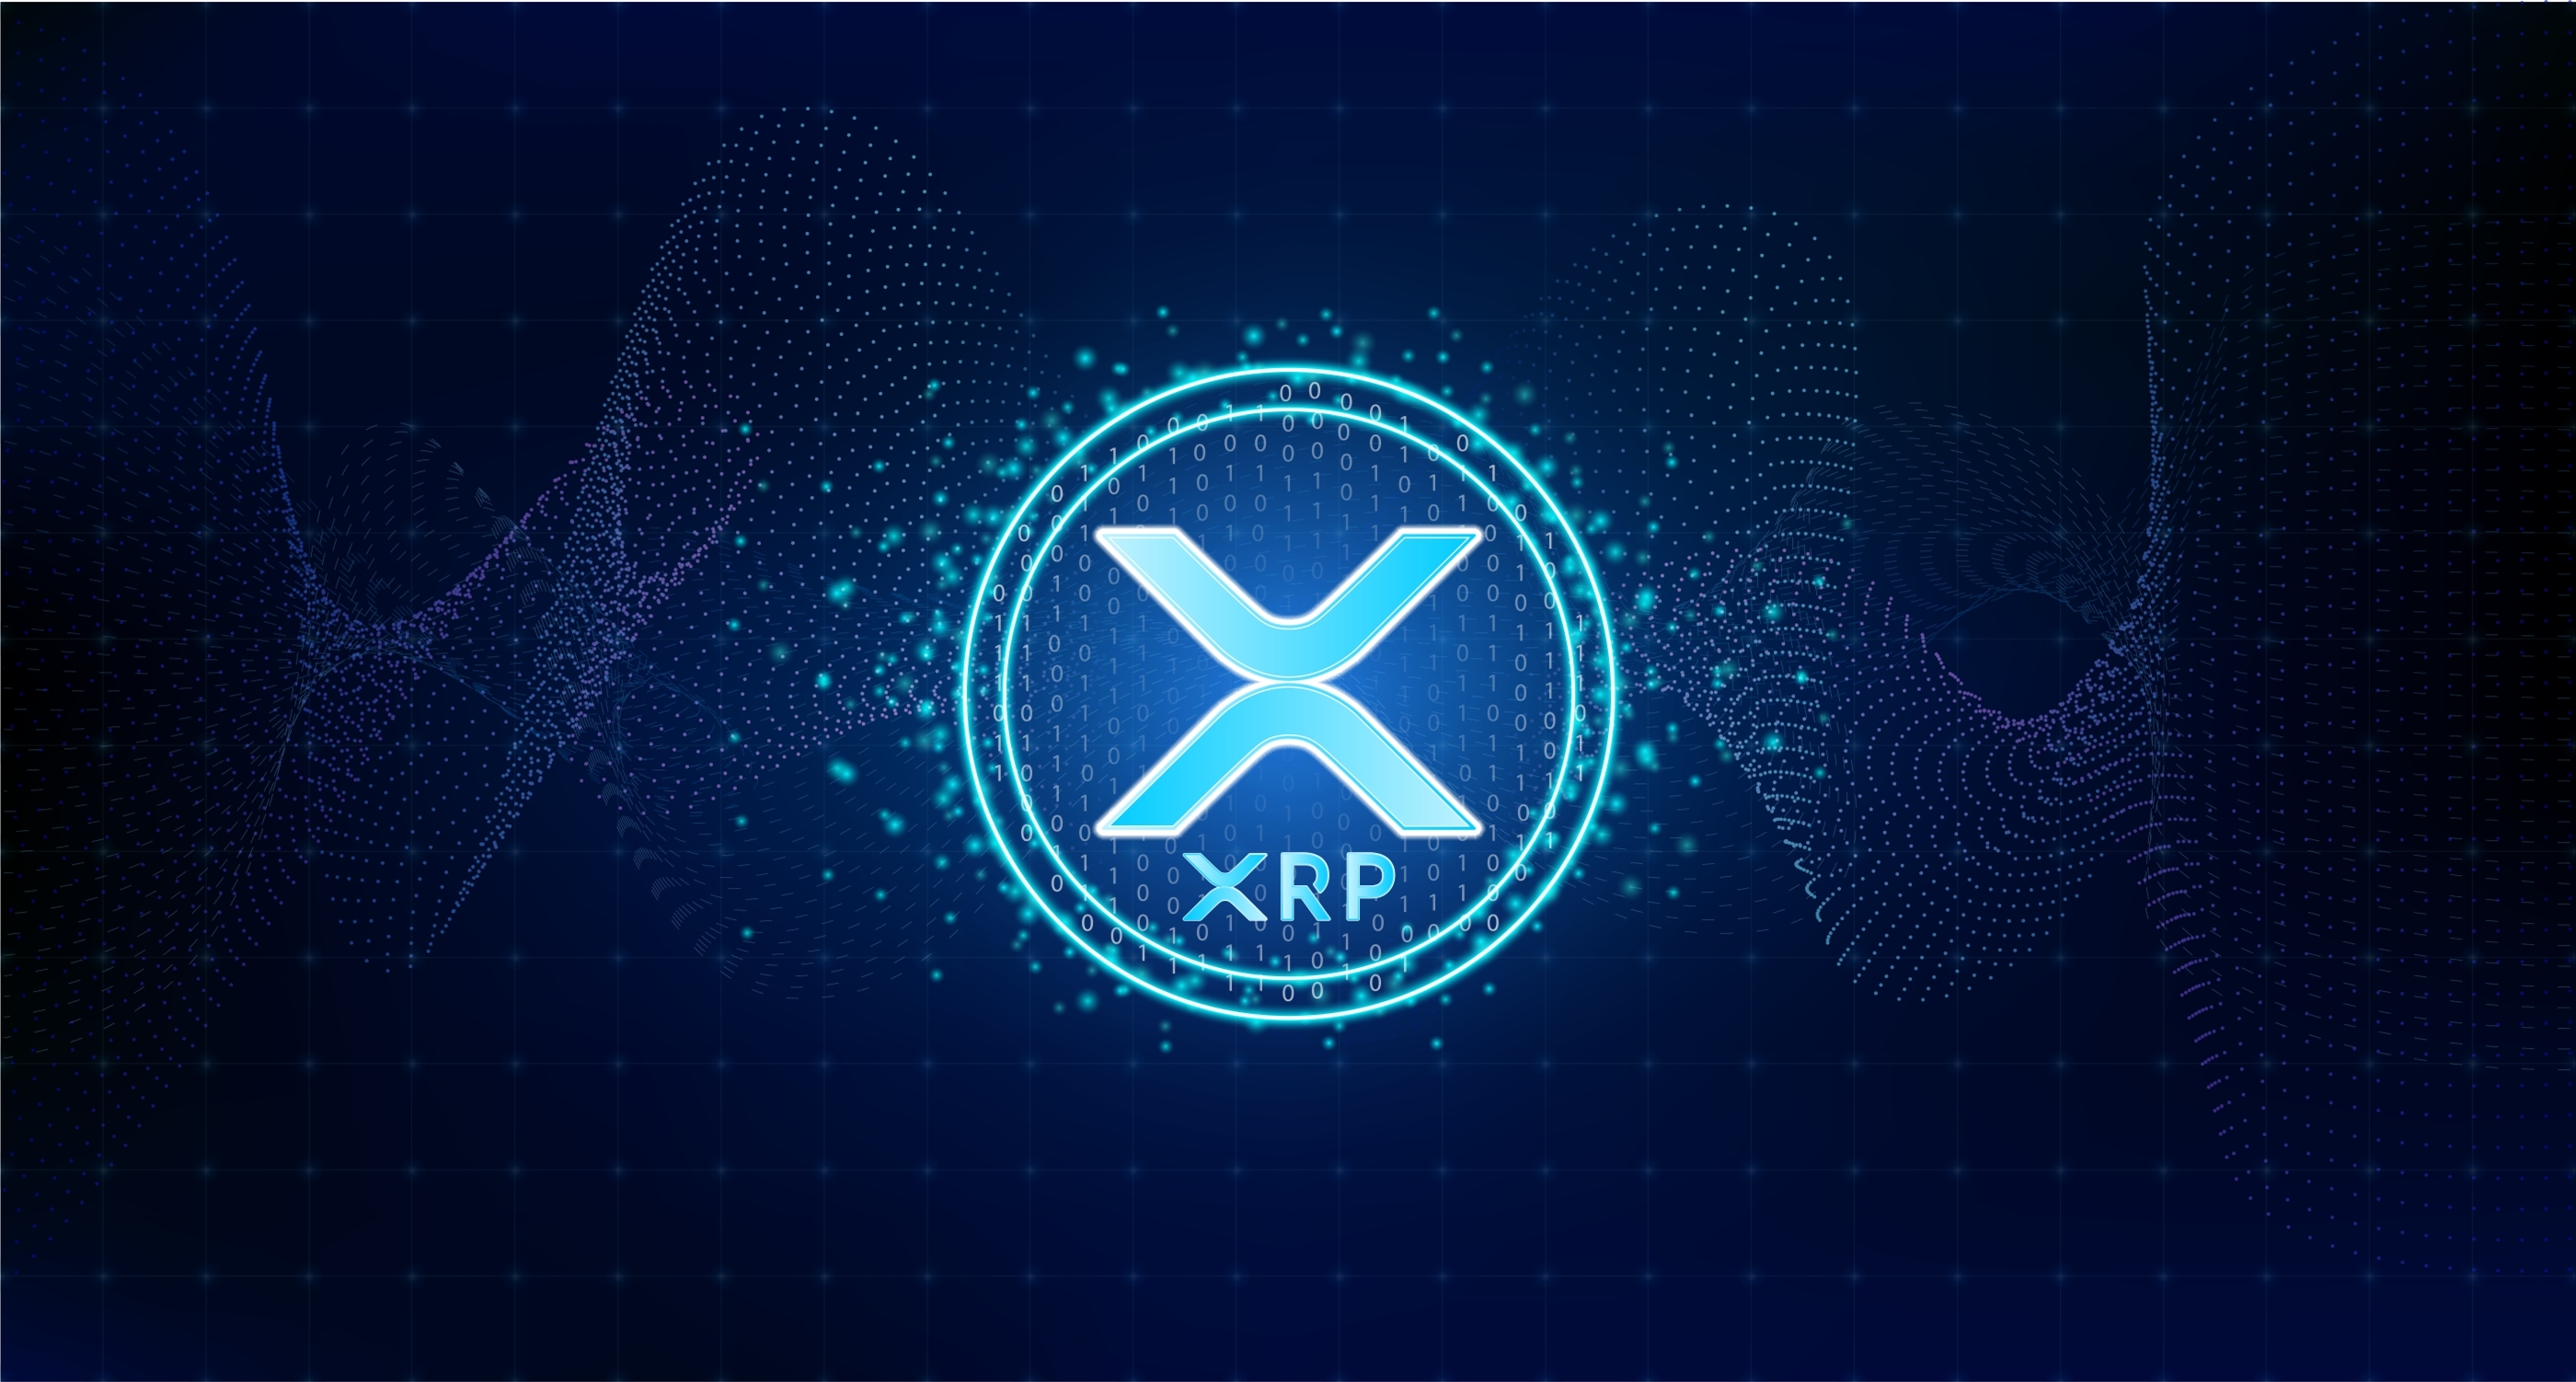 XRP Price Could Surge from New Acquisition, Amid Community Skepticism